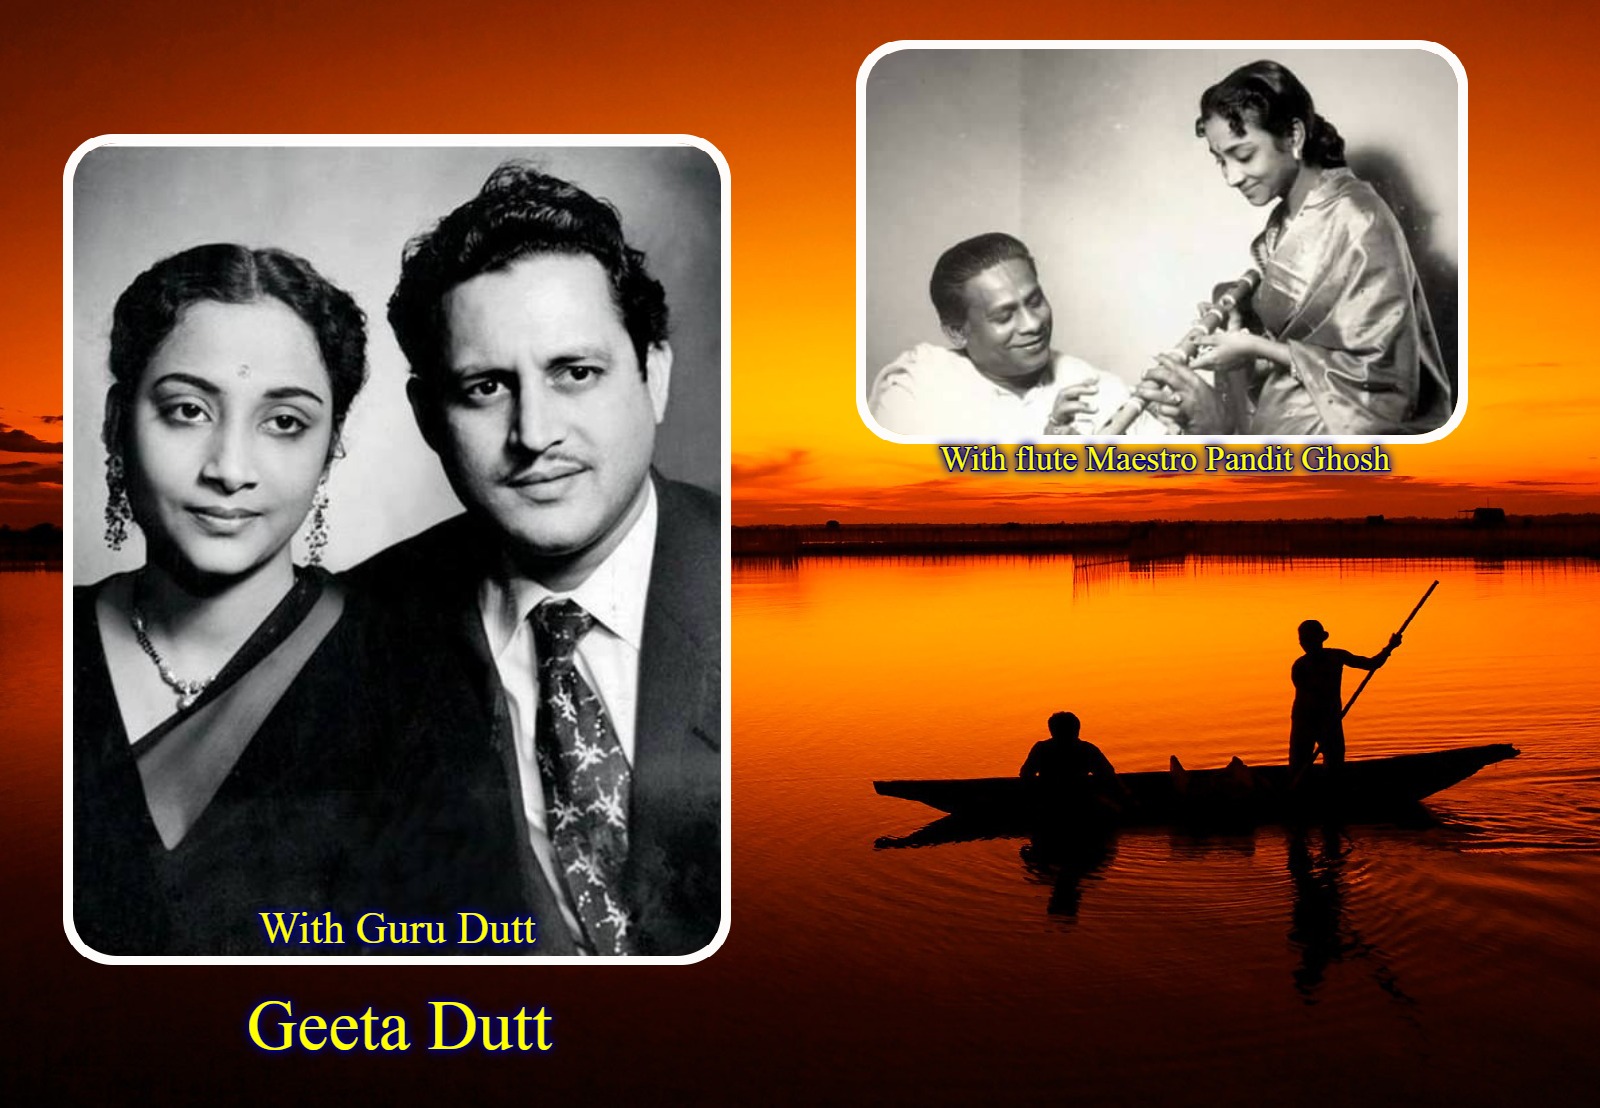 You are currently viewing “Popular Classical Singer Who Lived An Unhappy Life- Geeta Dutt”